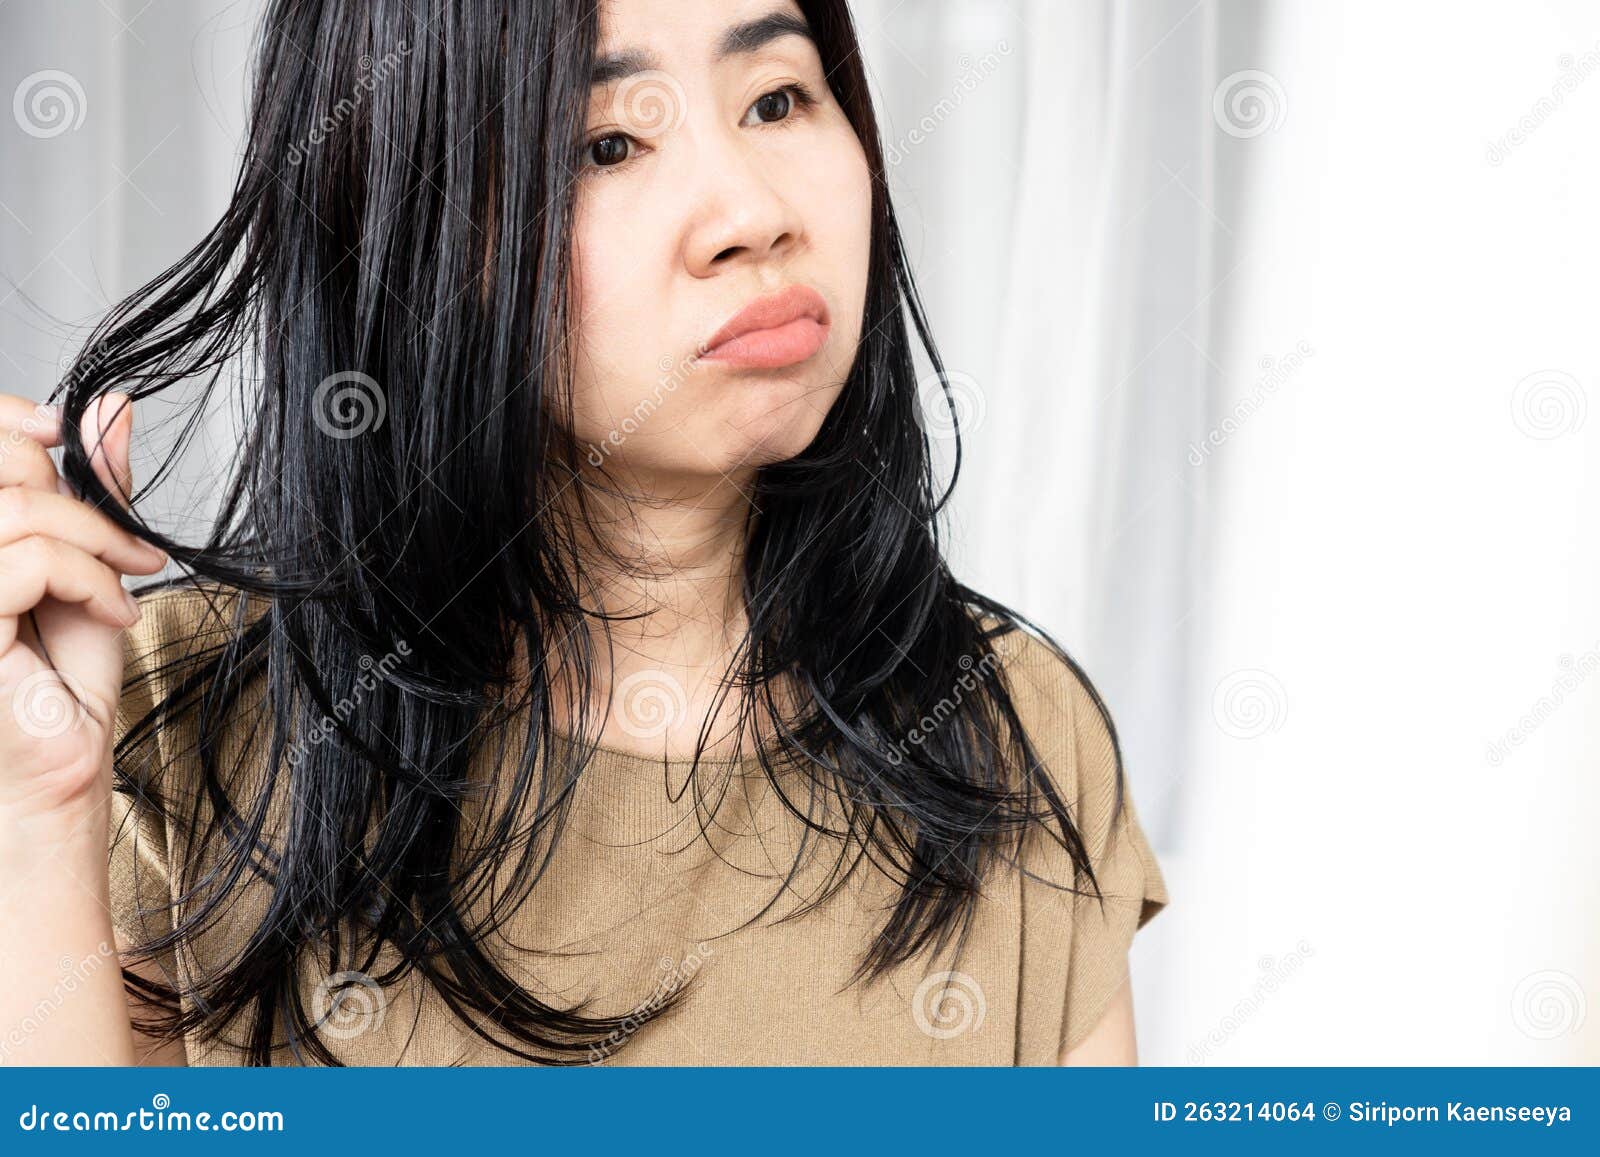 asian woman have problems with oily hair and thinning hair looking at the mirro